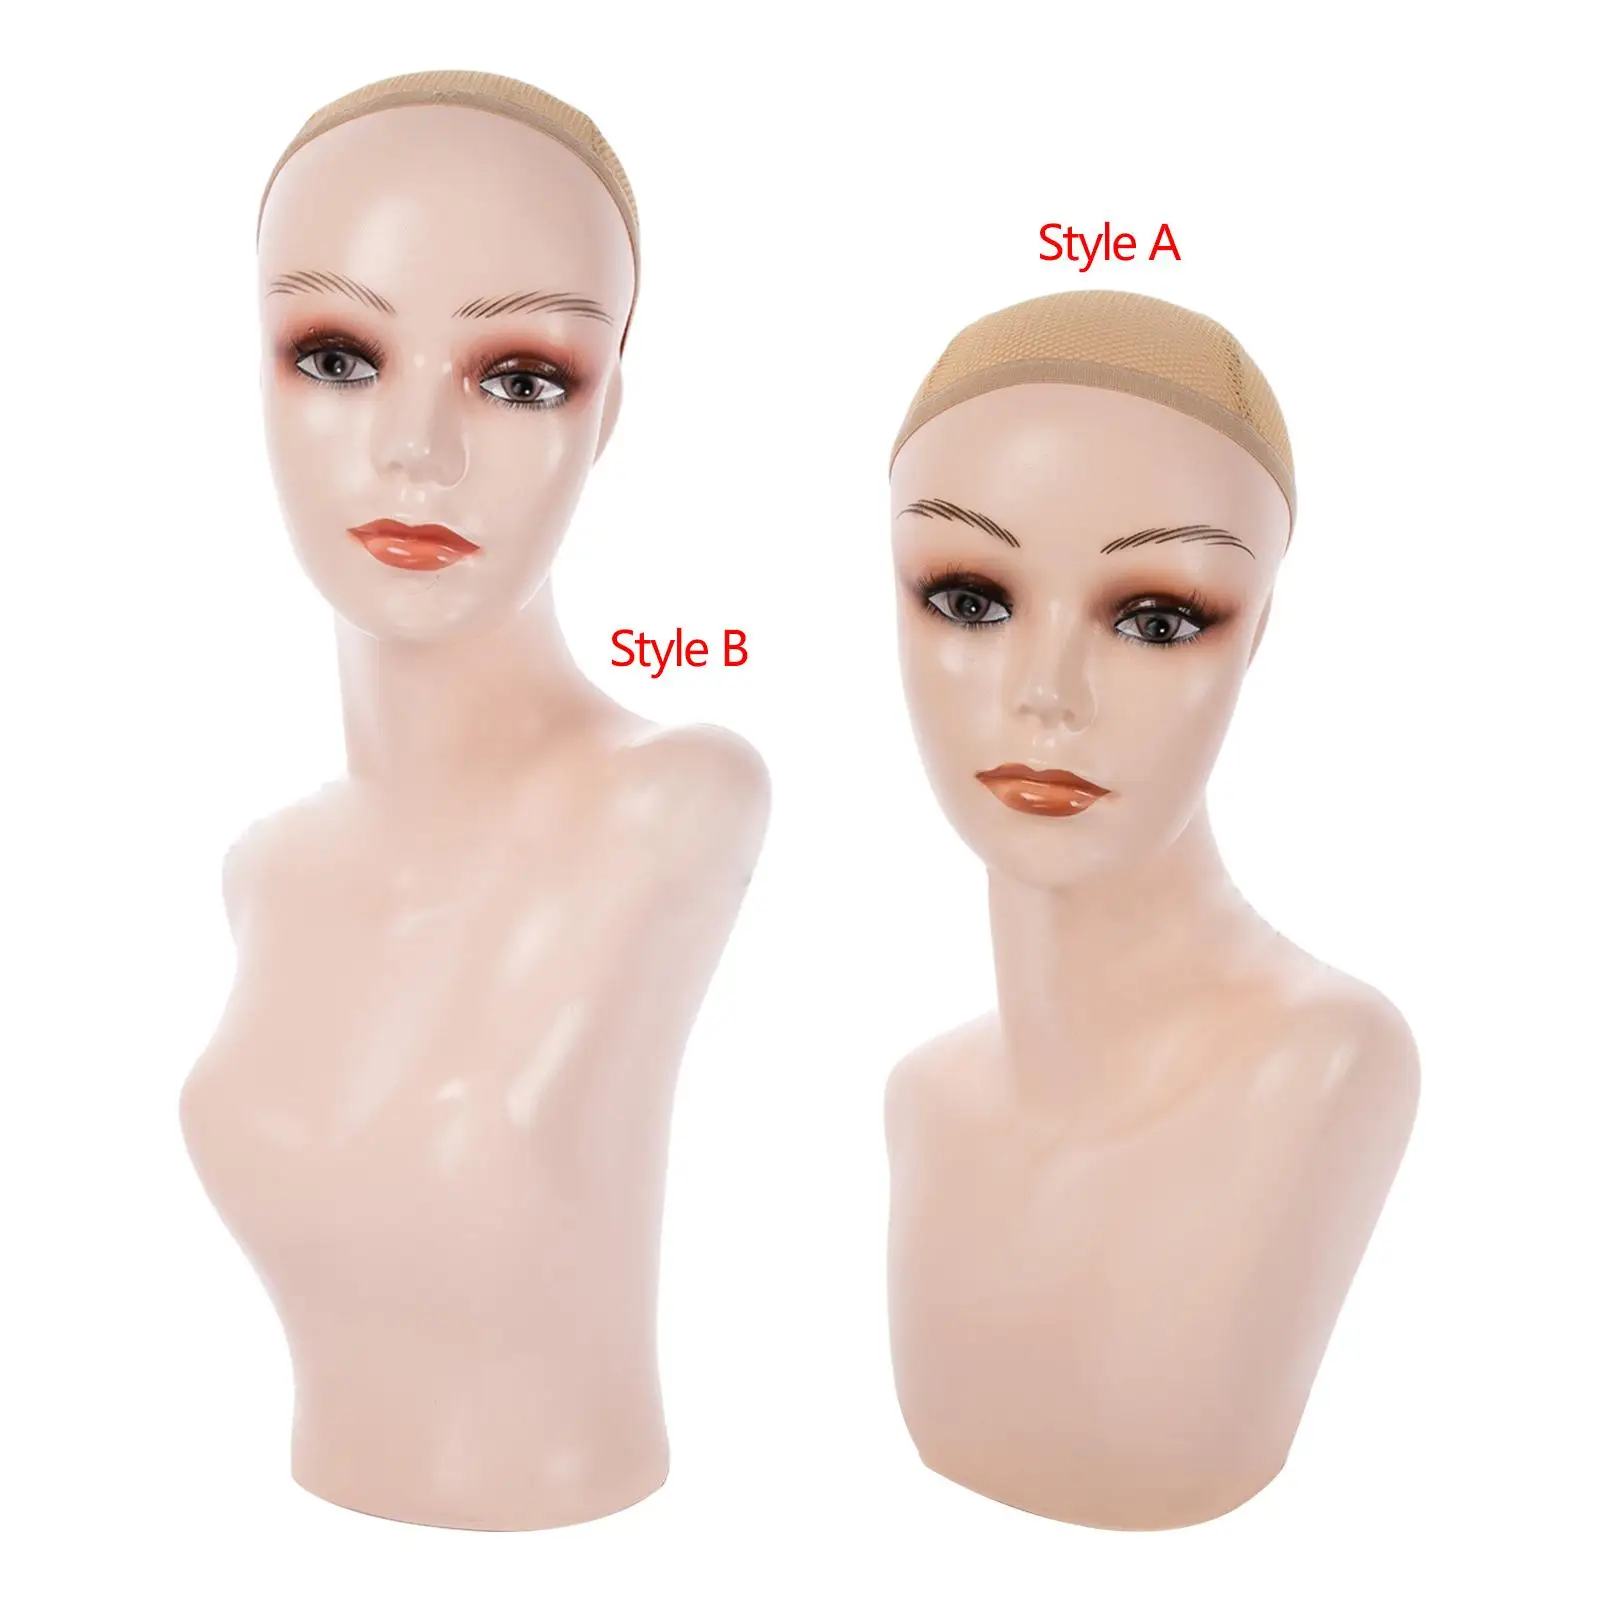 Female Mannequin Head Wig Holder Multipurpose Wig Display Model for Jewelry Necklace Wigs Displaying Making Styling Glasses Hats